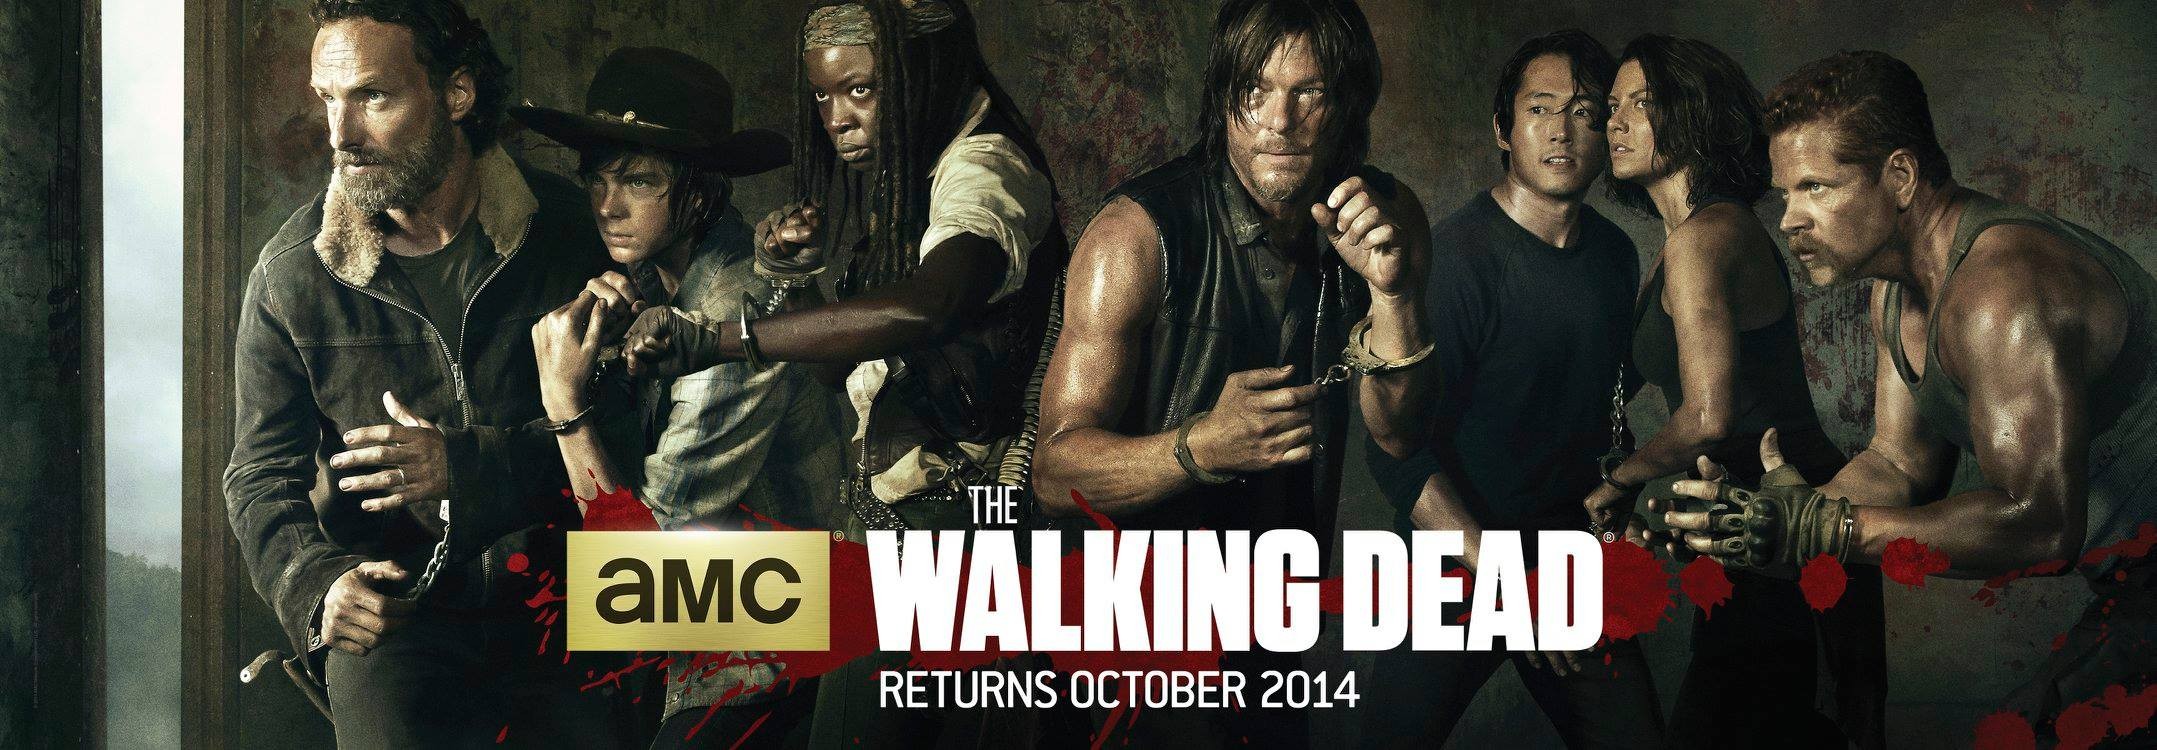 Mega Sized TV Poster Image for The Walking Dead (#37 of 67)